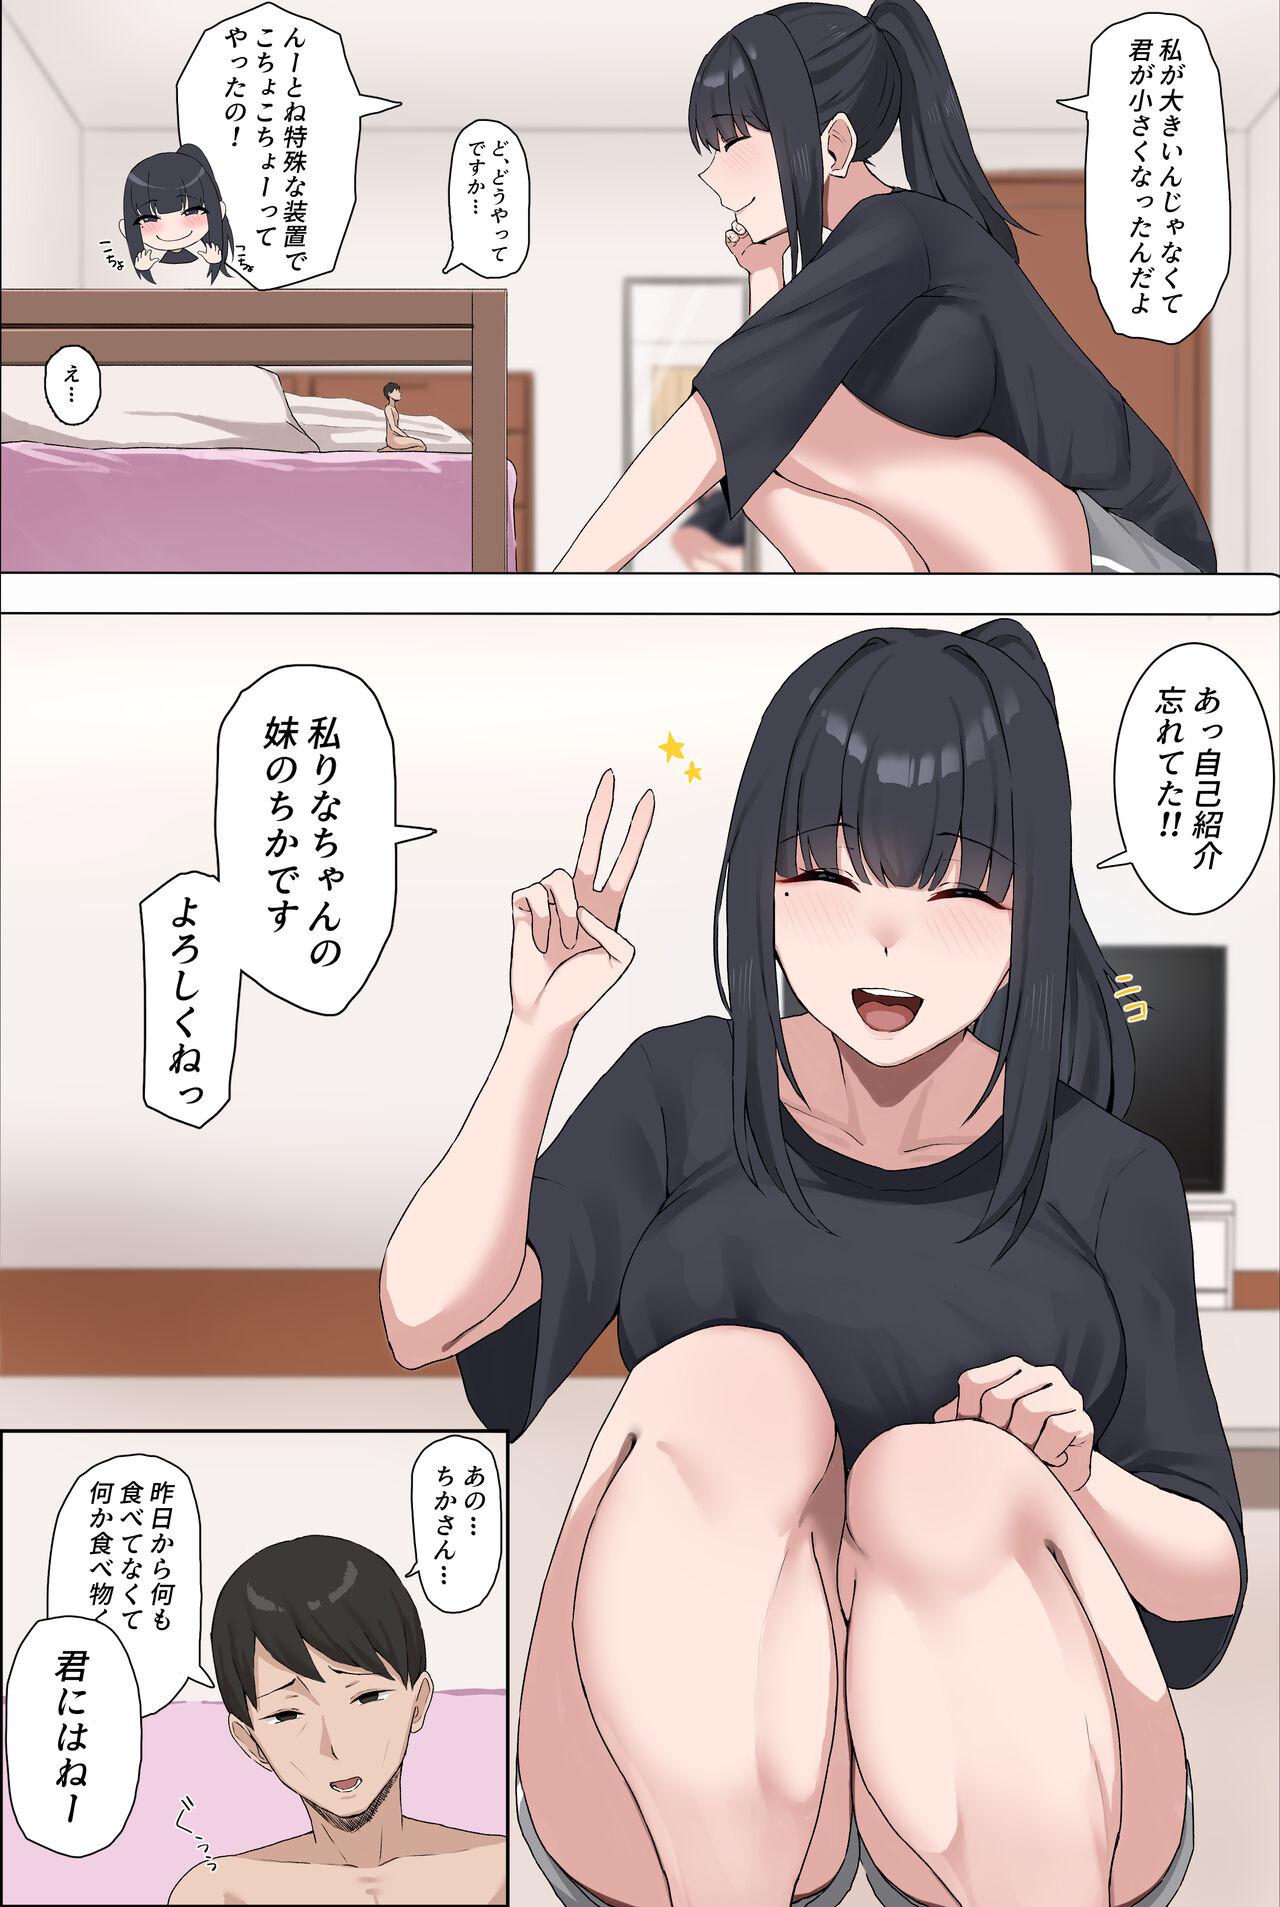 Pussy Fingering リクエストありがとうございました - Original Eating - Picture 3